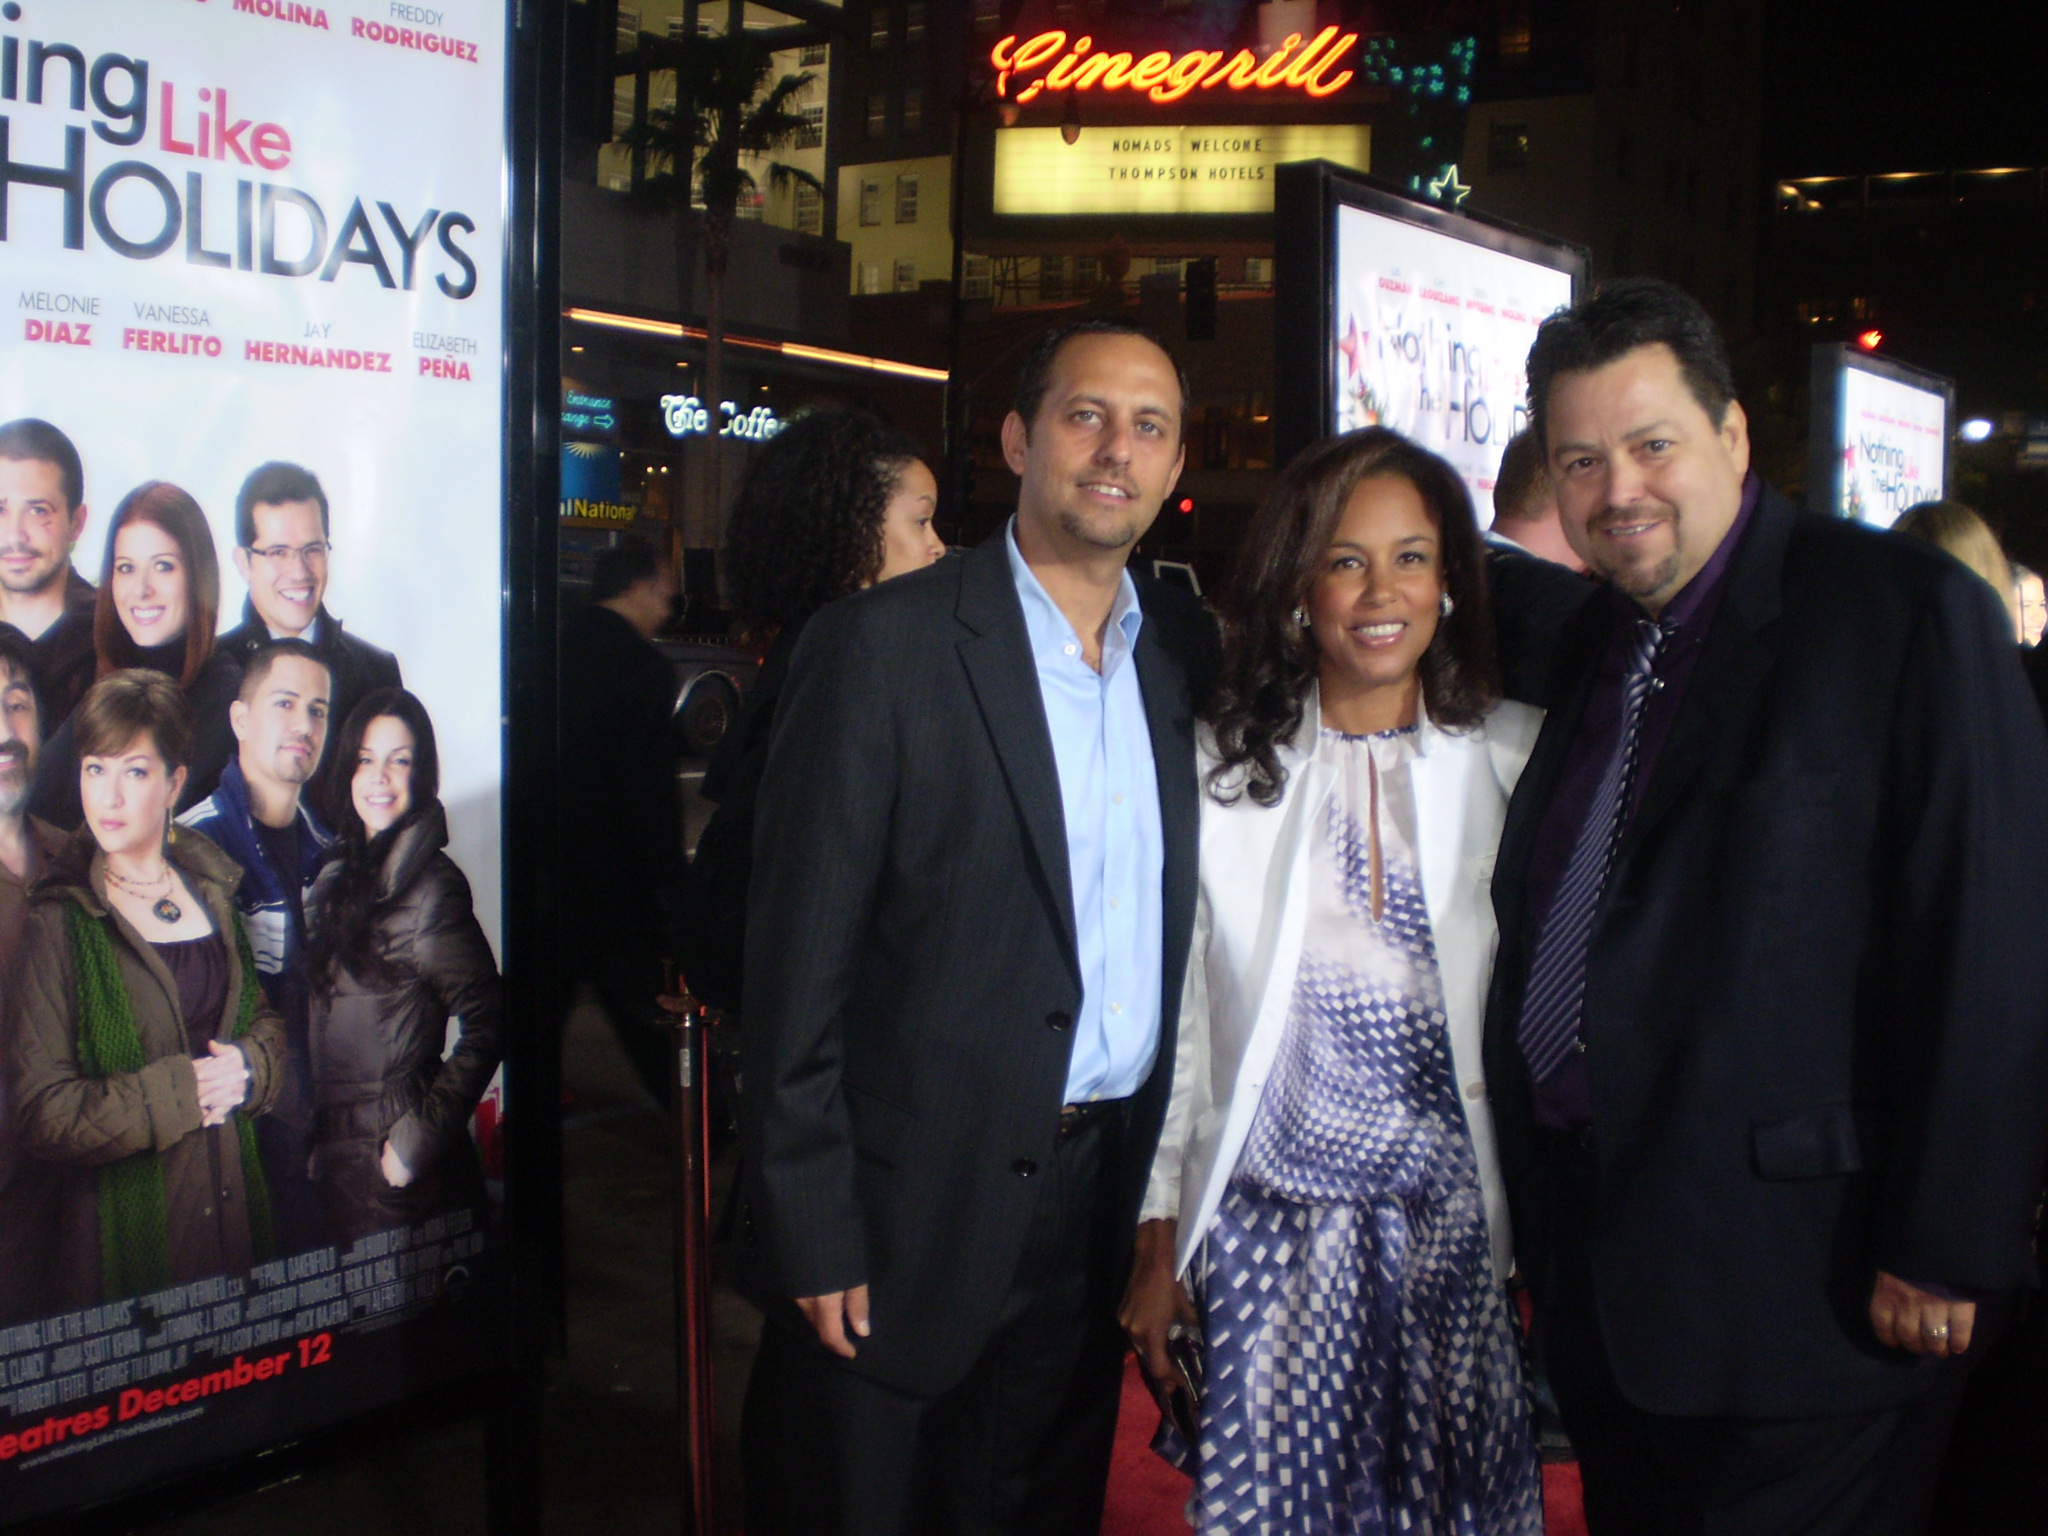 Nothing Like the Holidays Premiere; Writers Rick Najera and Alison Swan and Producer Bob Tietel